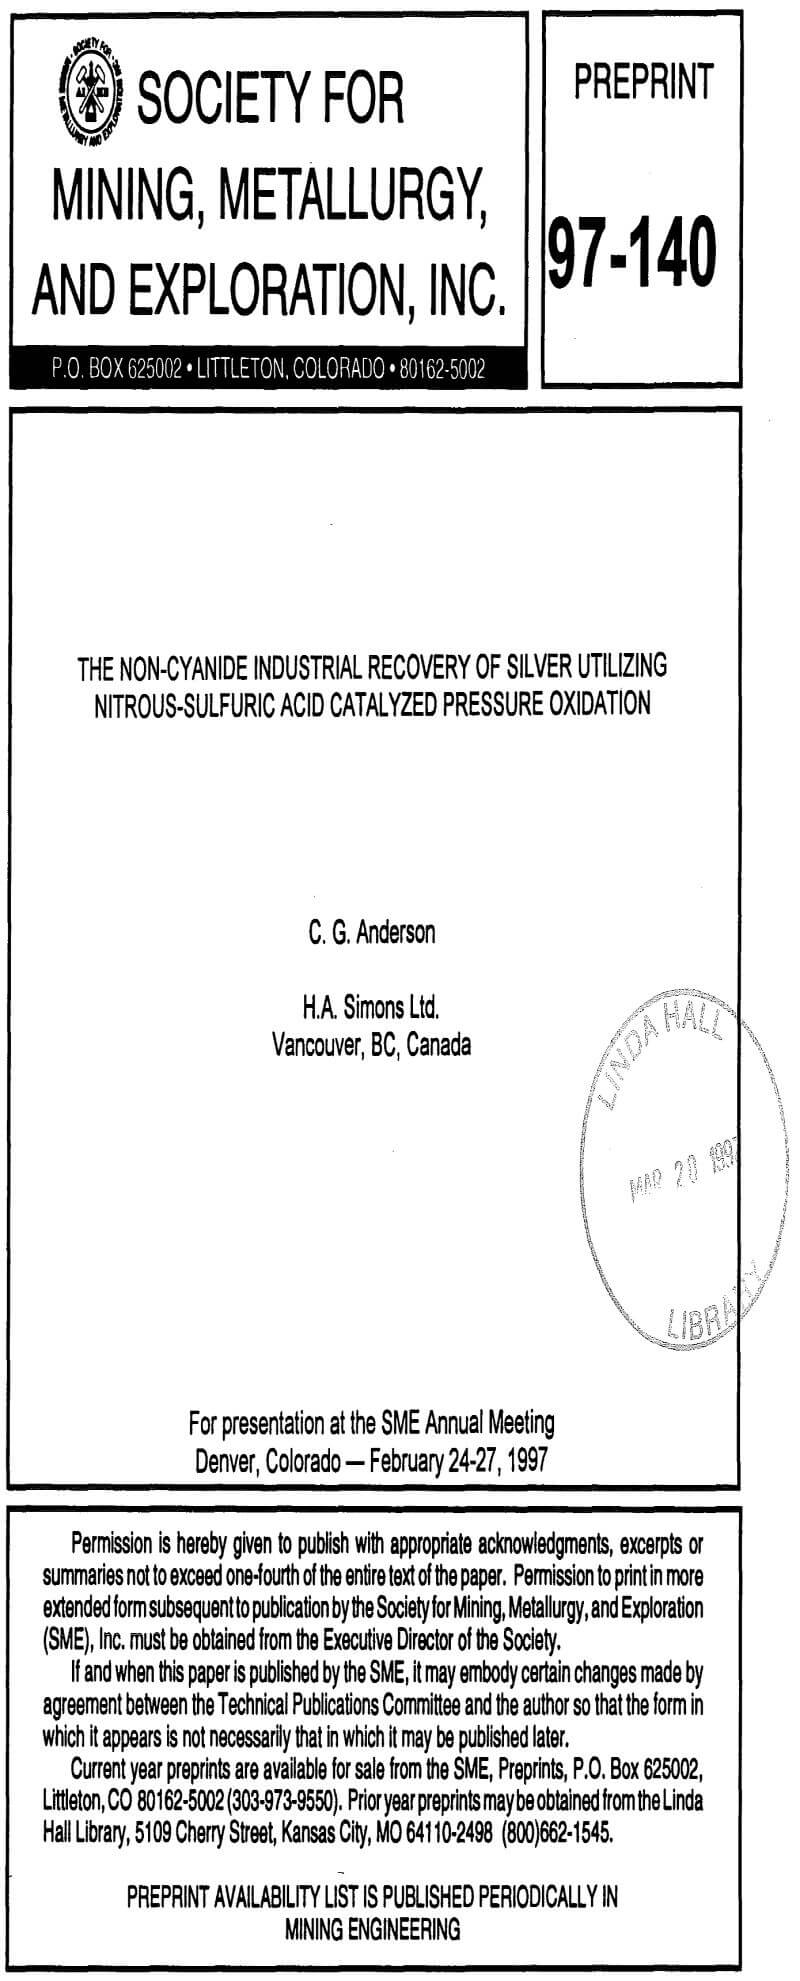 the non-cyanide industrial recovery of silver utilizing nitrous-sulfuric acid catalyzed pressure oxidation